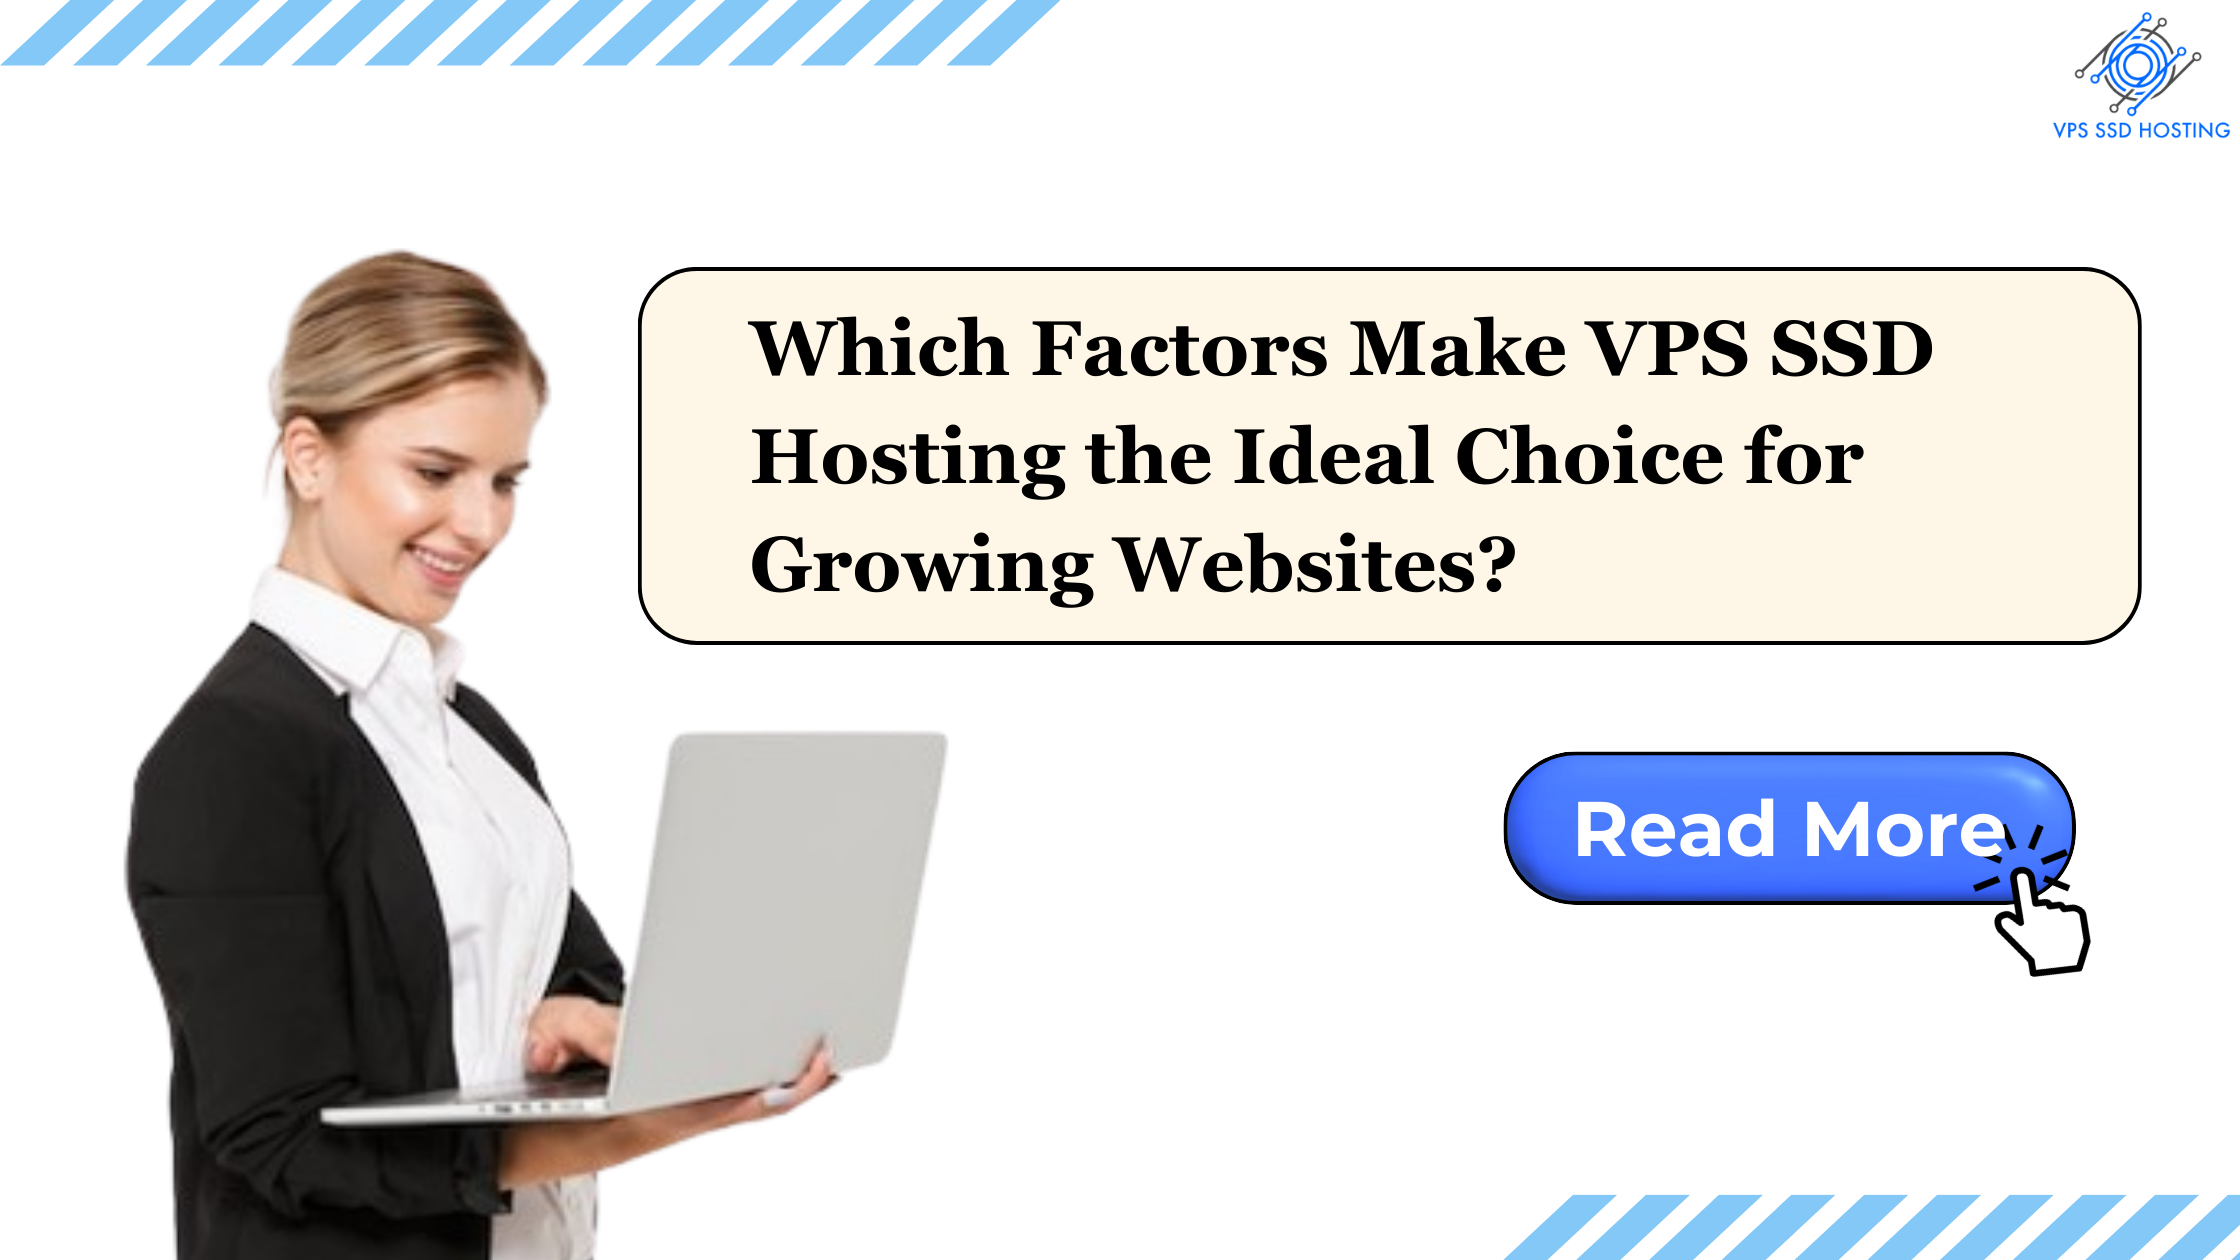 Which Factors Make VPS SSD Hosting the Ideal Choice for Growing Websites?